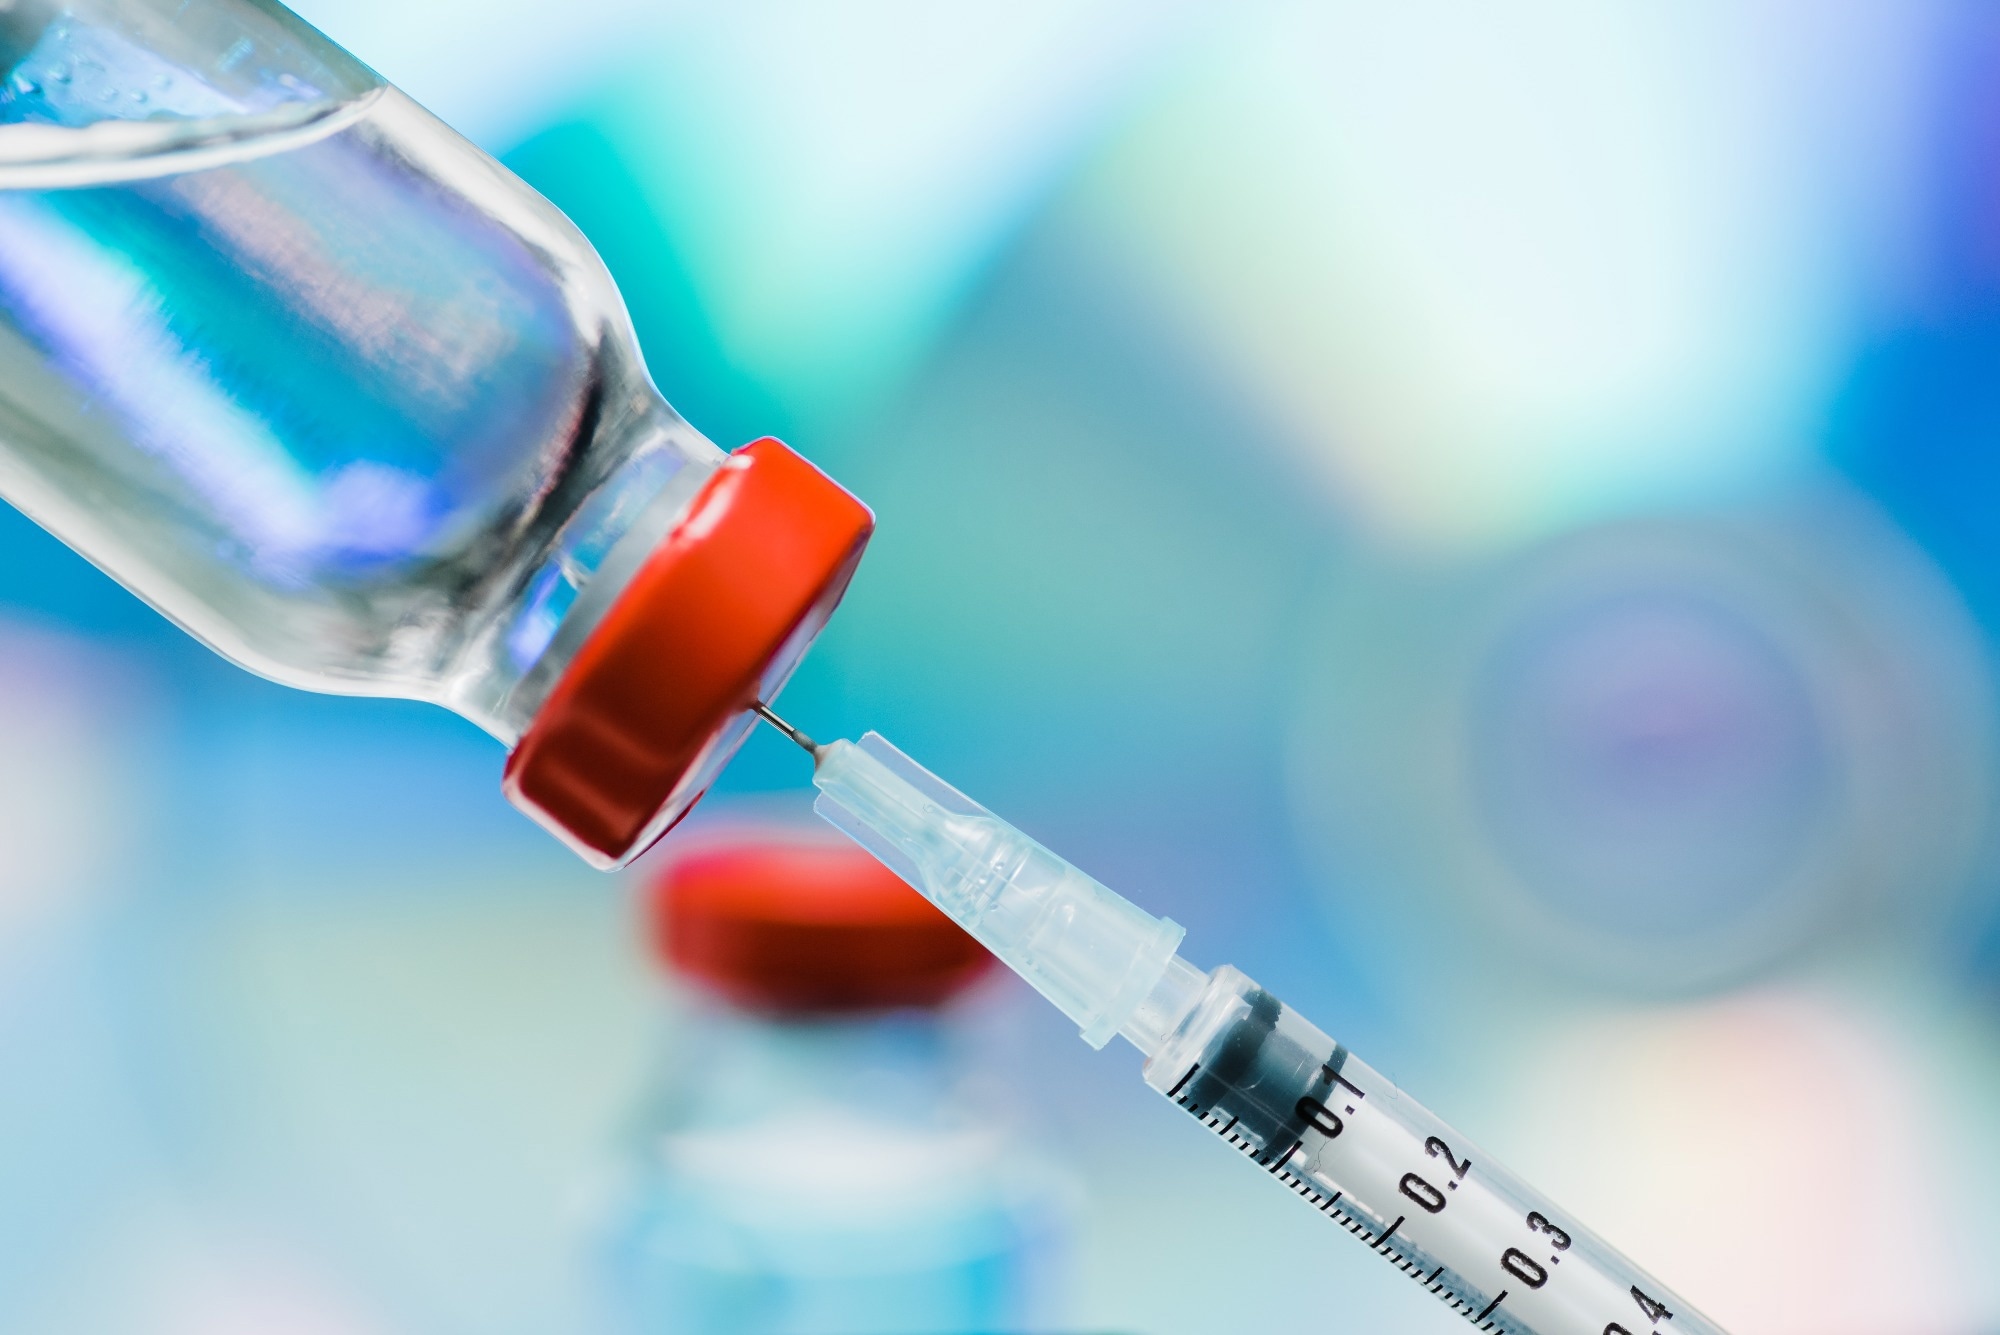 Report: Has COVID-19 Threatened Routine Childhood Vaccination? Insights From US Public Opinion Polls. Image Credit: Rohane Hamilton / Shutterstock